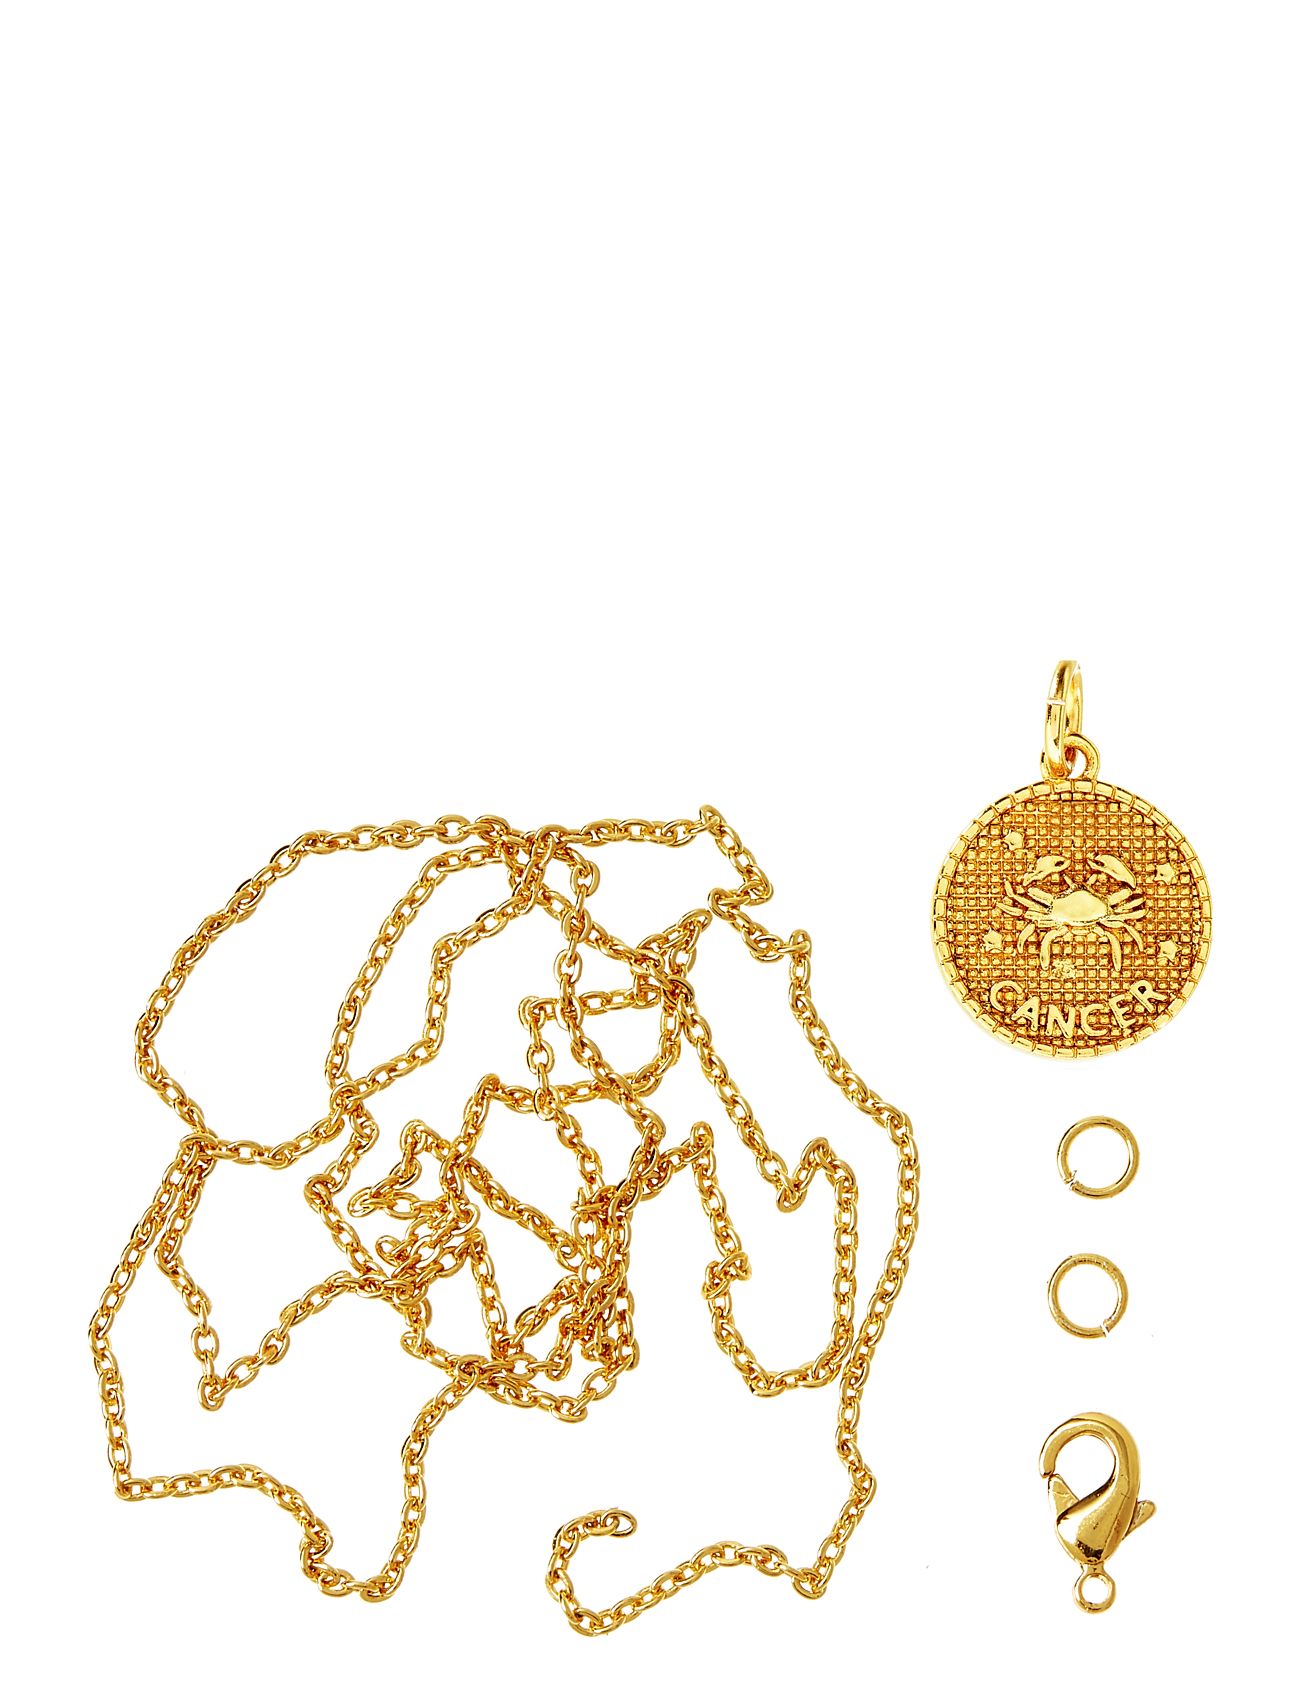 Zodiac Coin Pendant And Chain Set, Cancer Toys Creativity Drawing & Crafts Craft Jewellery & Accessories Gold Me & My Box